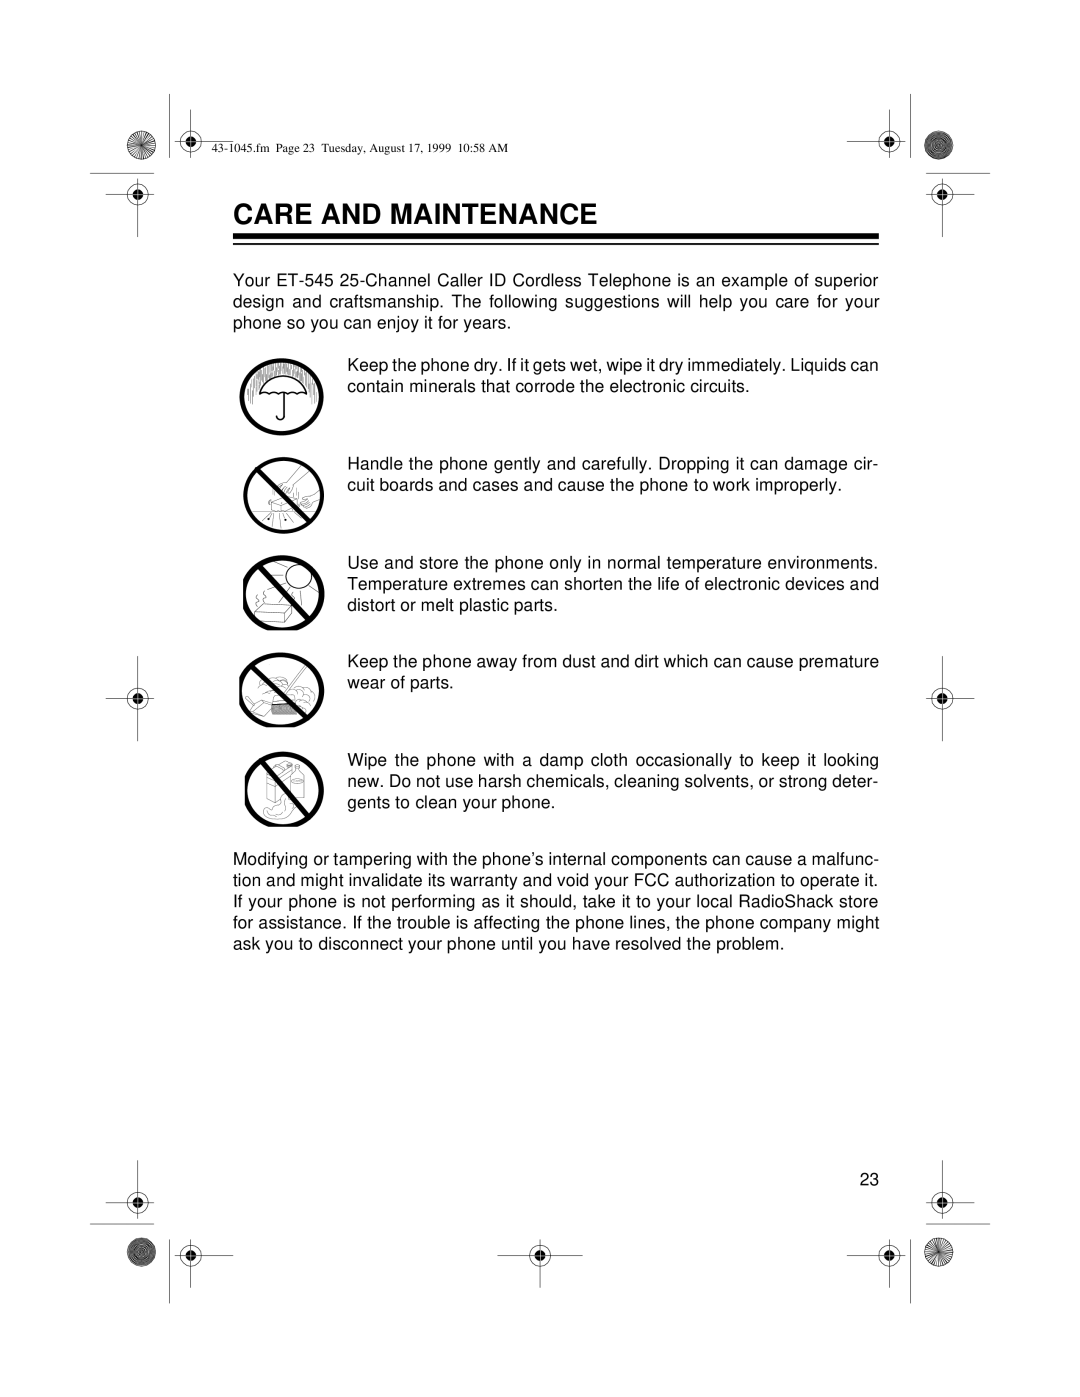 Radio Shack ET-545 owner manual Care and Maintenance 